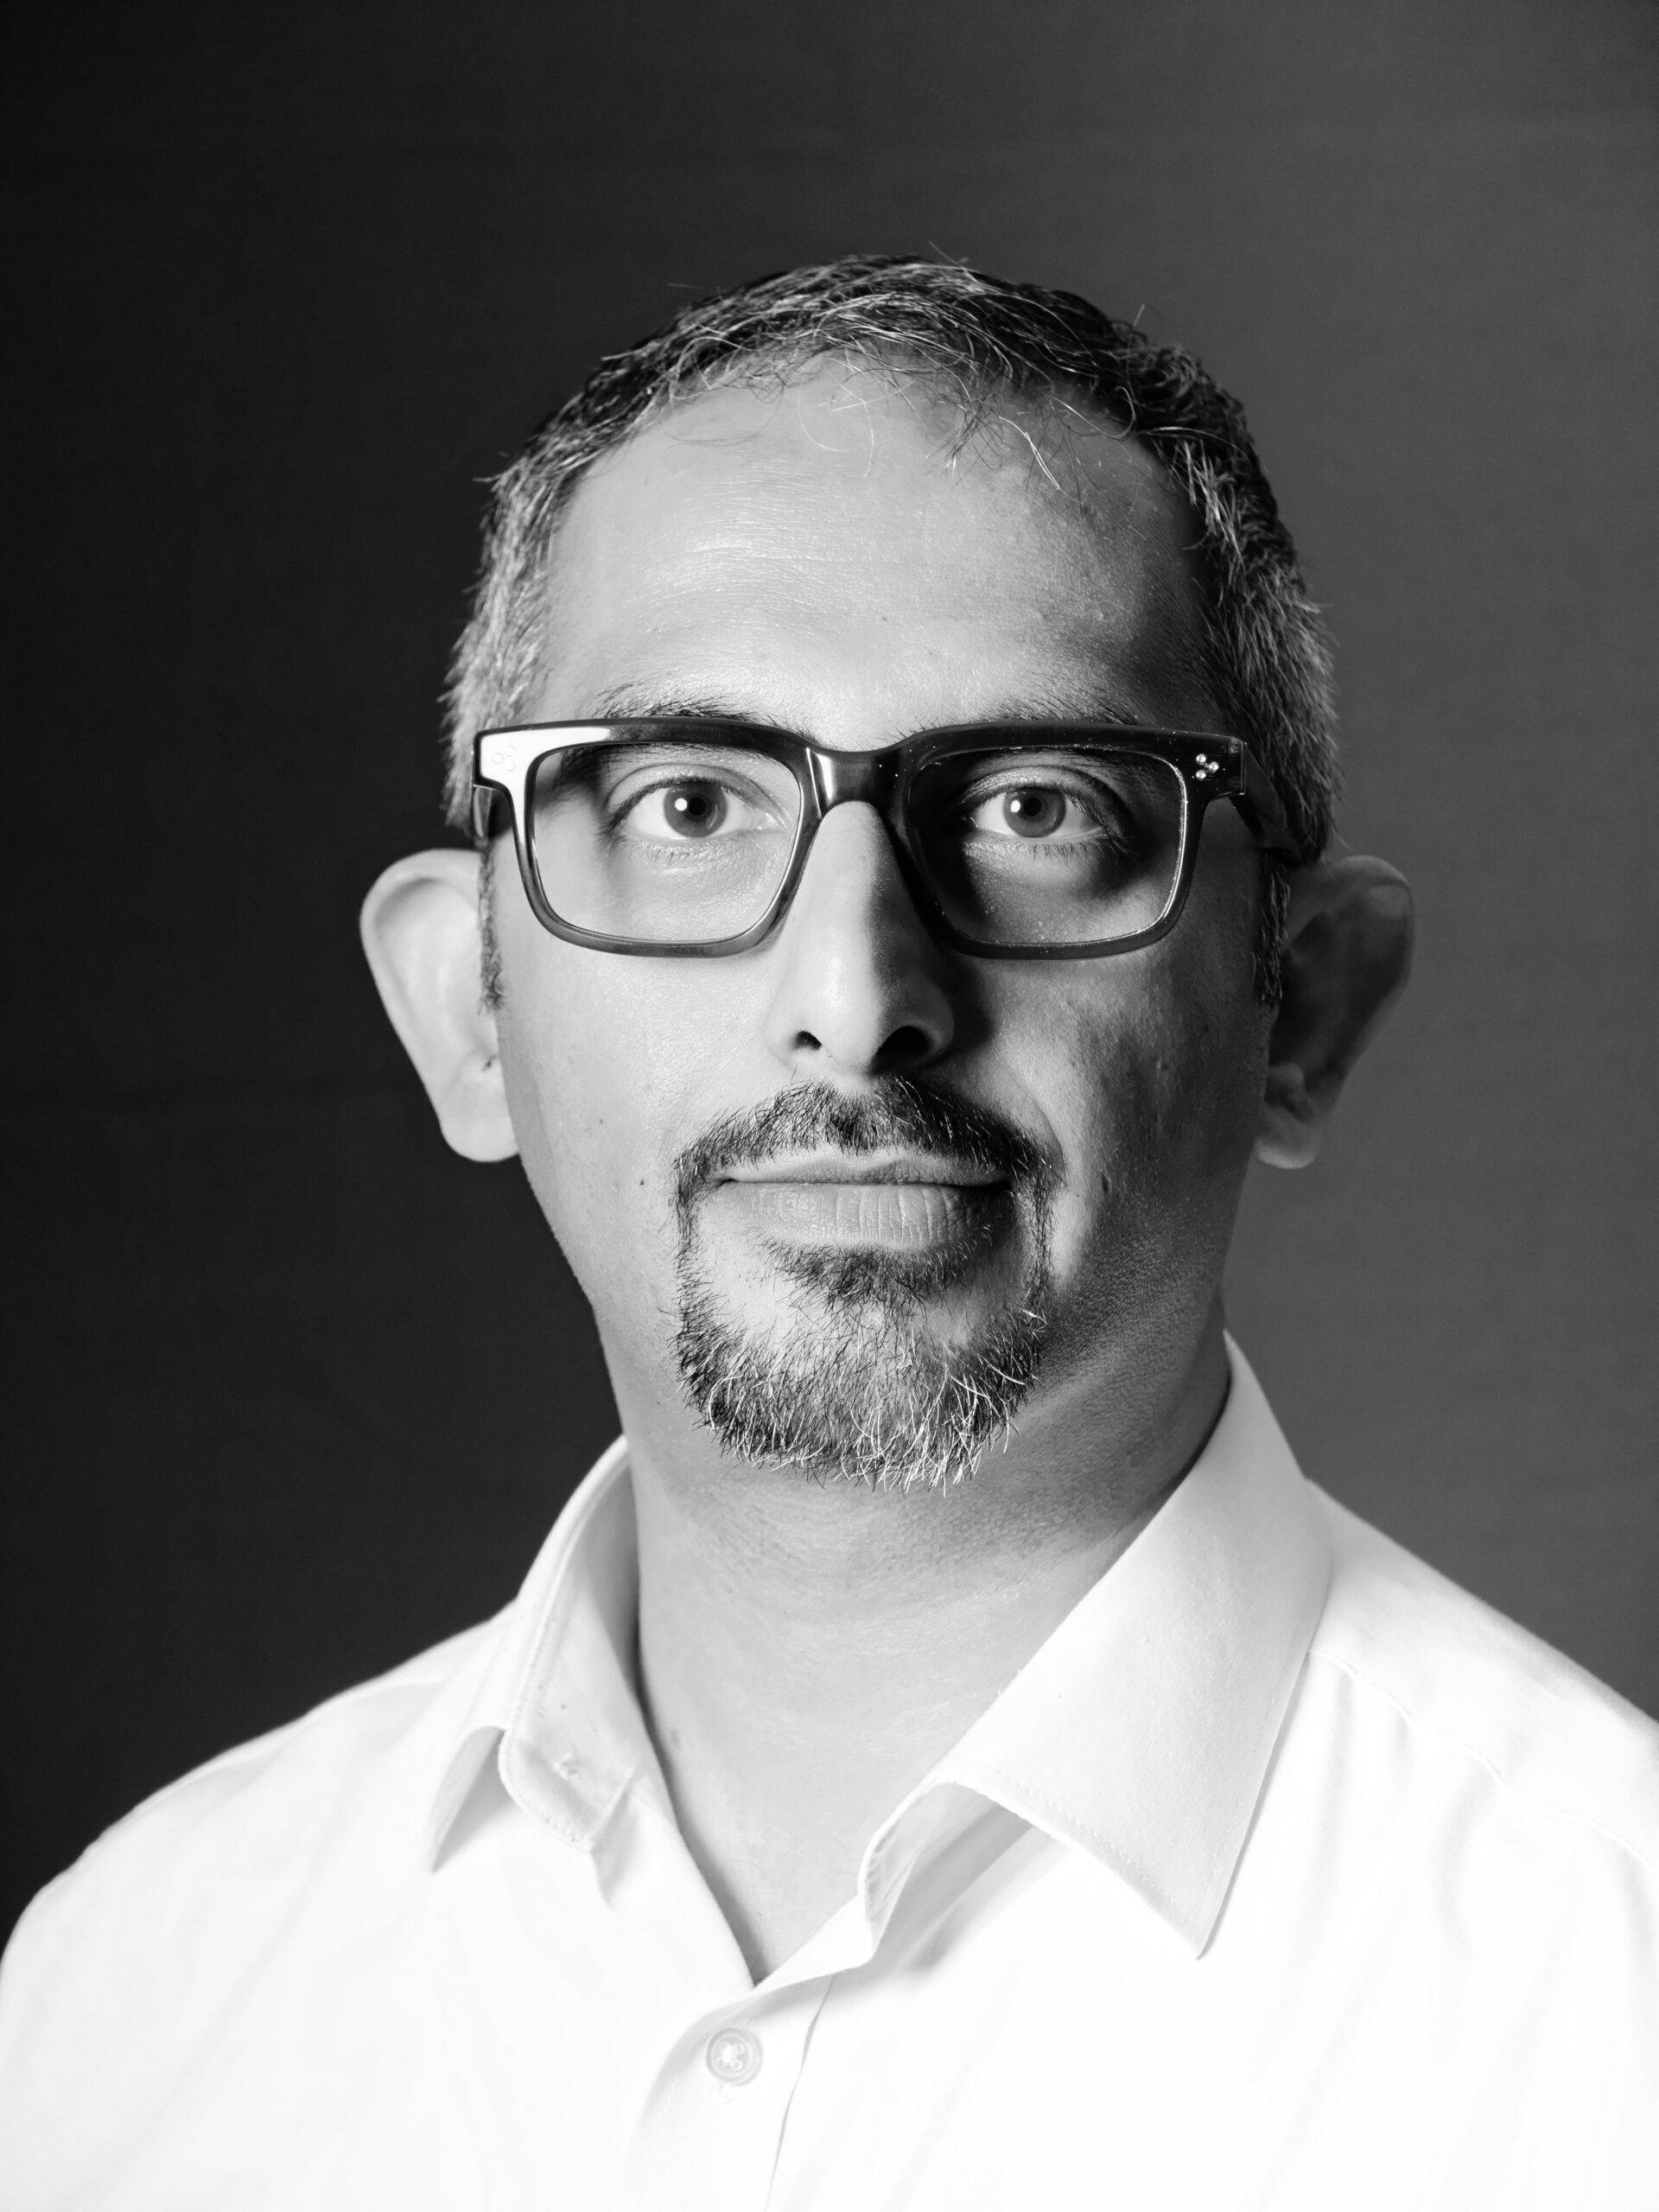 A black and white photo of a man wearing glasses posing for a headshot